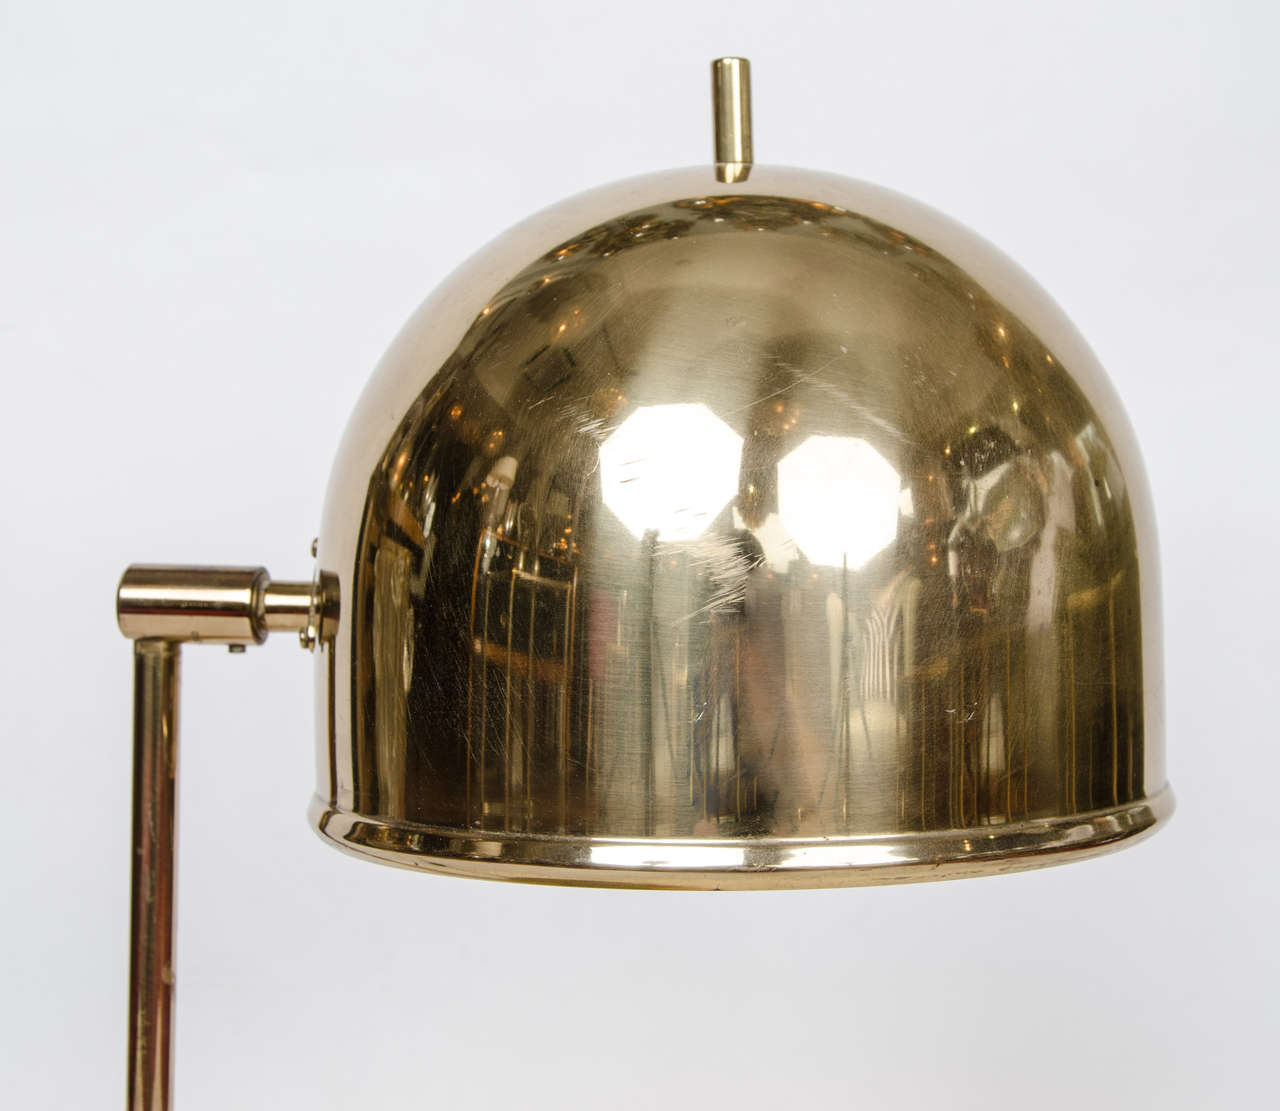 Adjustable tilting head domed brass table lamp with simple brass arm and circular stand.